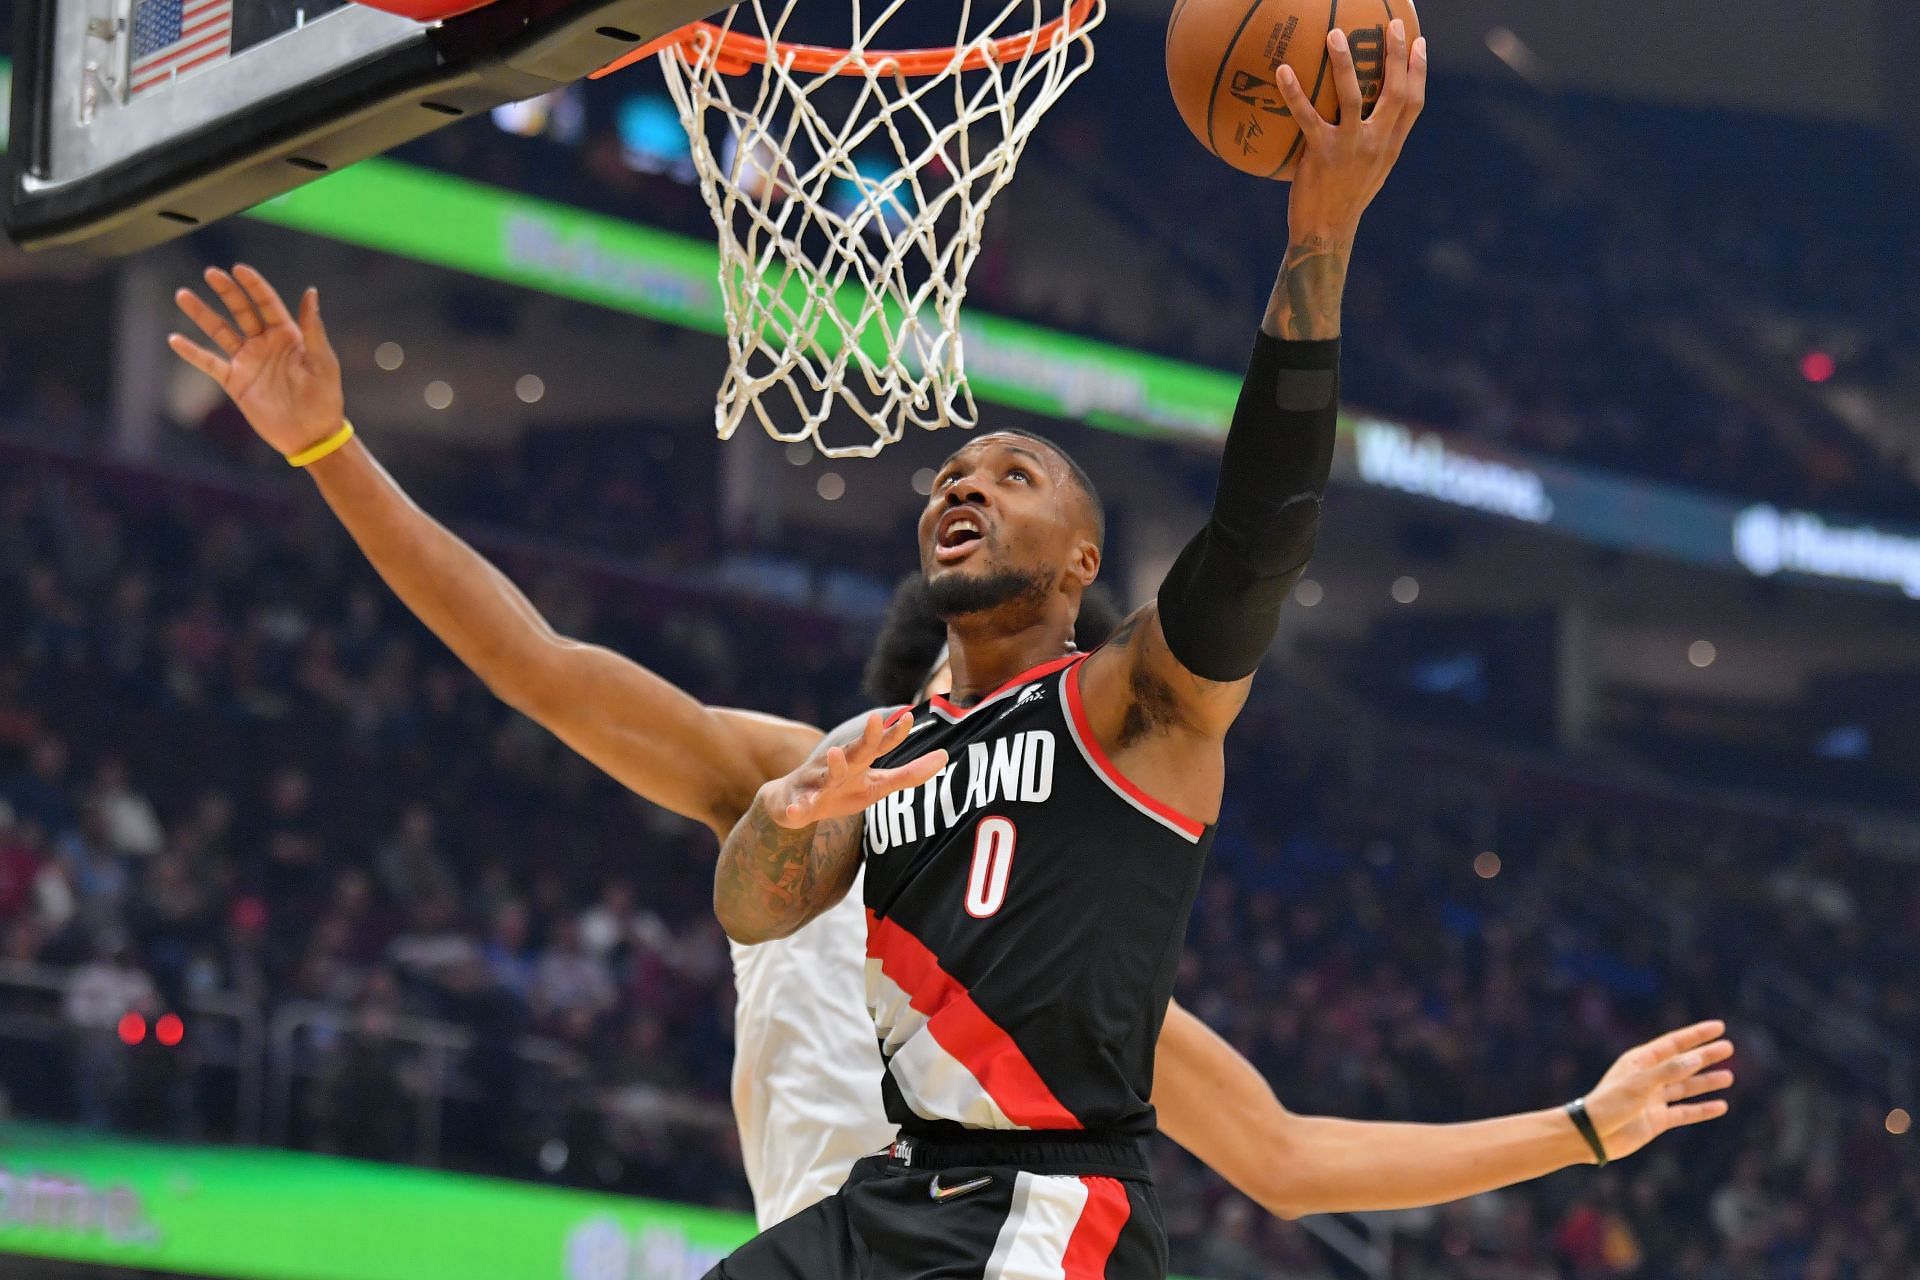 Damian Lillard in action for the Portland Trail Blazers